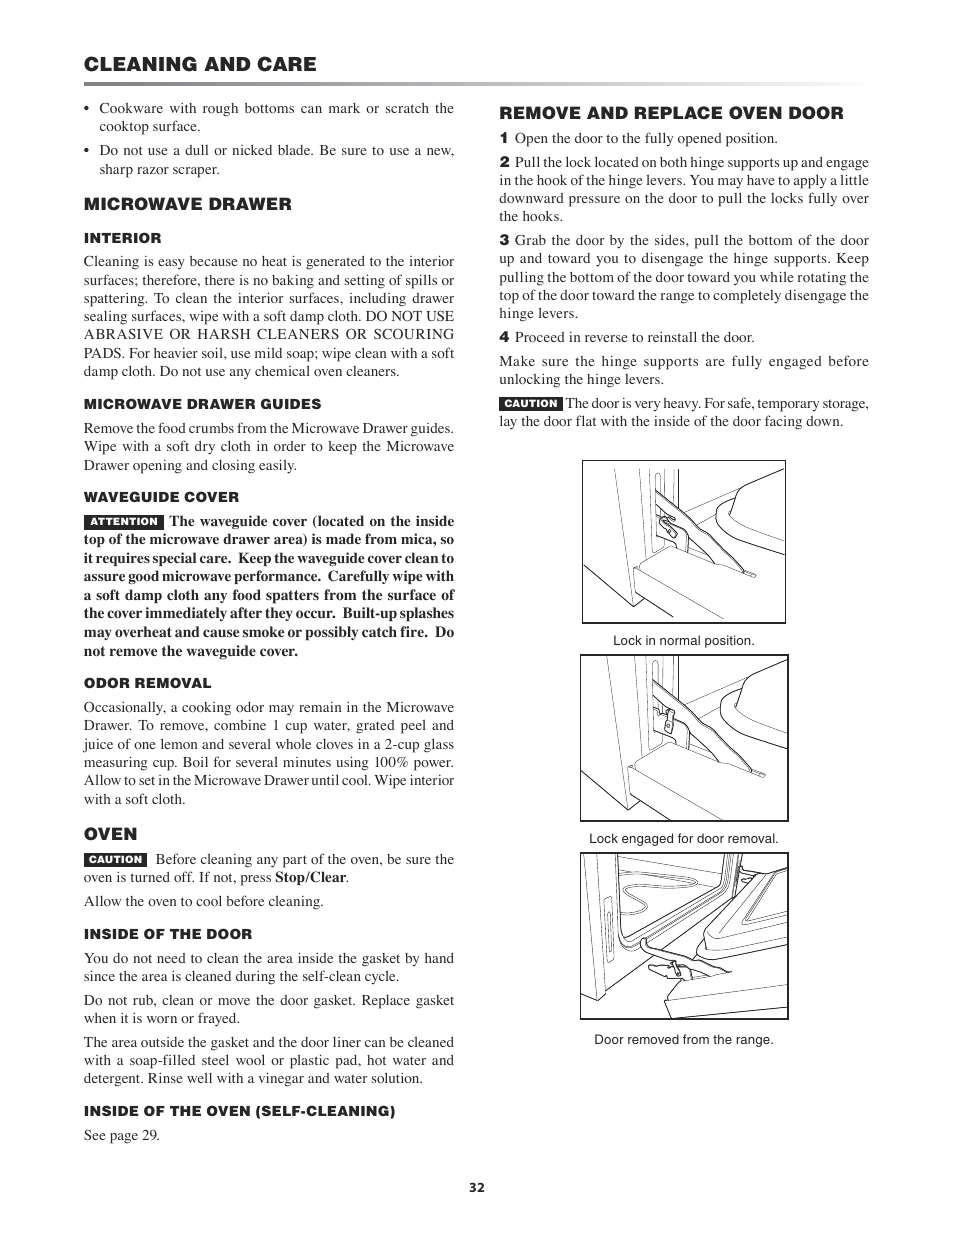 Ve drawer oven remove and replace oven door, Cleaning and care | Sharp KB-3411J User Manual | Page 32 / 40